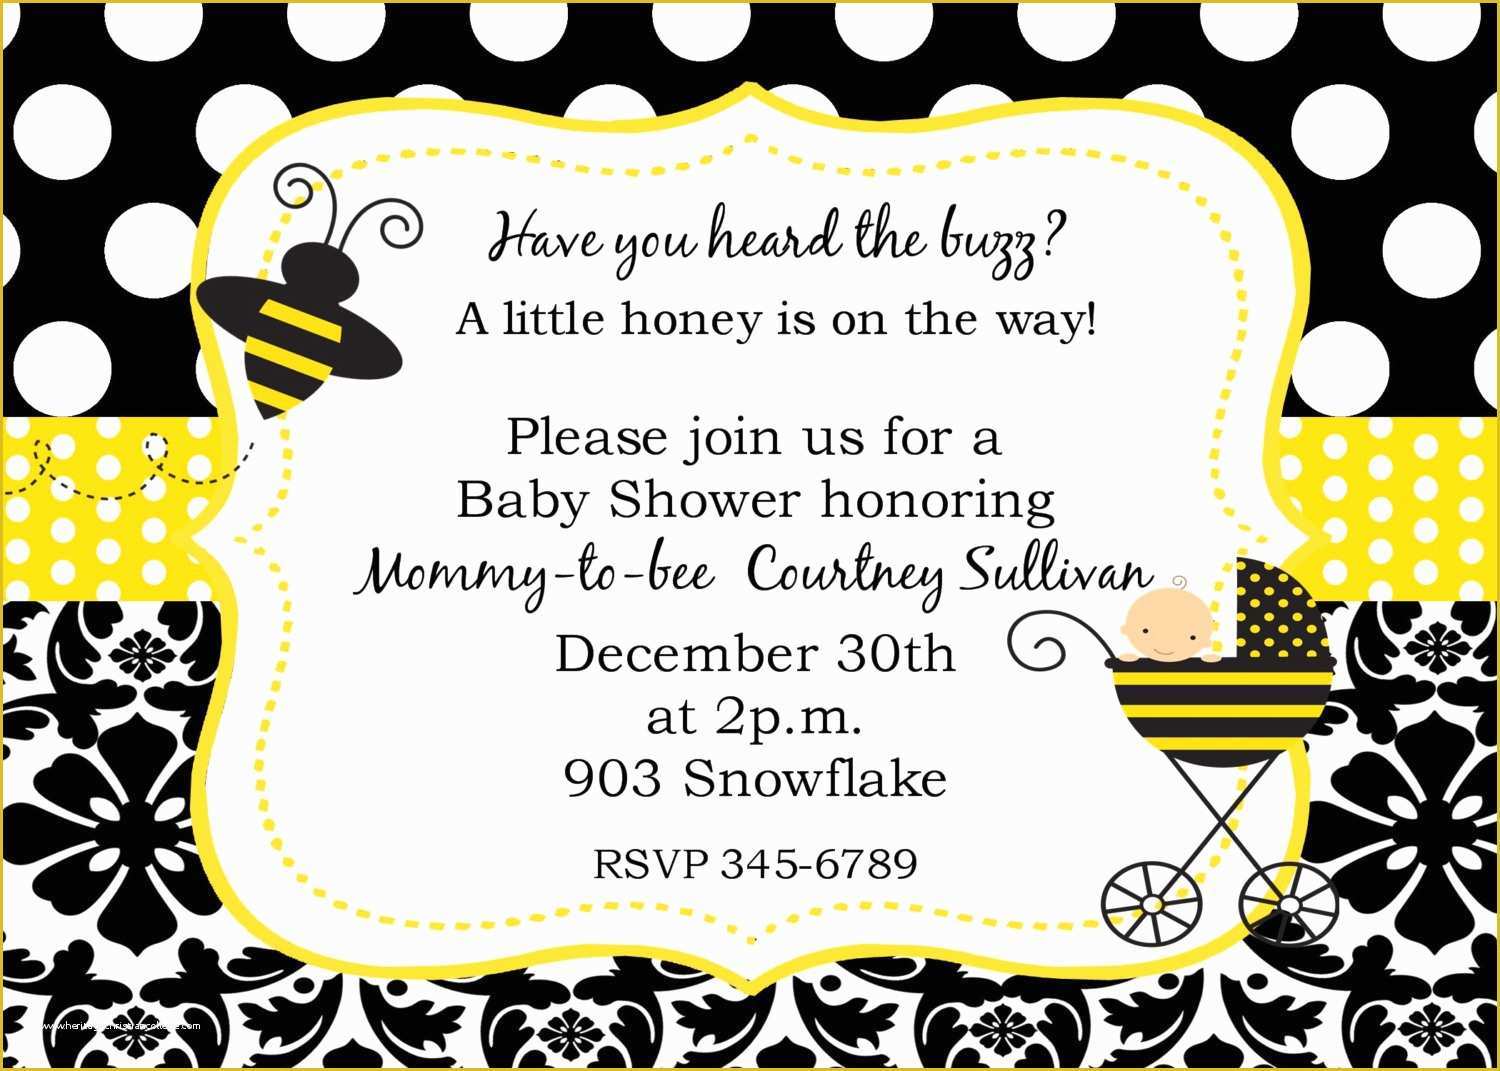 Bumble Bee Invitation Template Free Of Bumble Bee Baby Shower Ideas